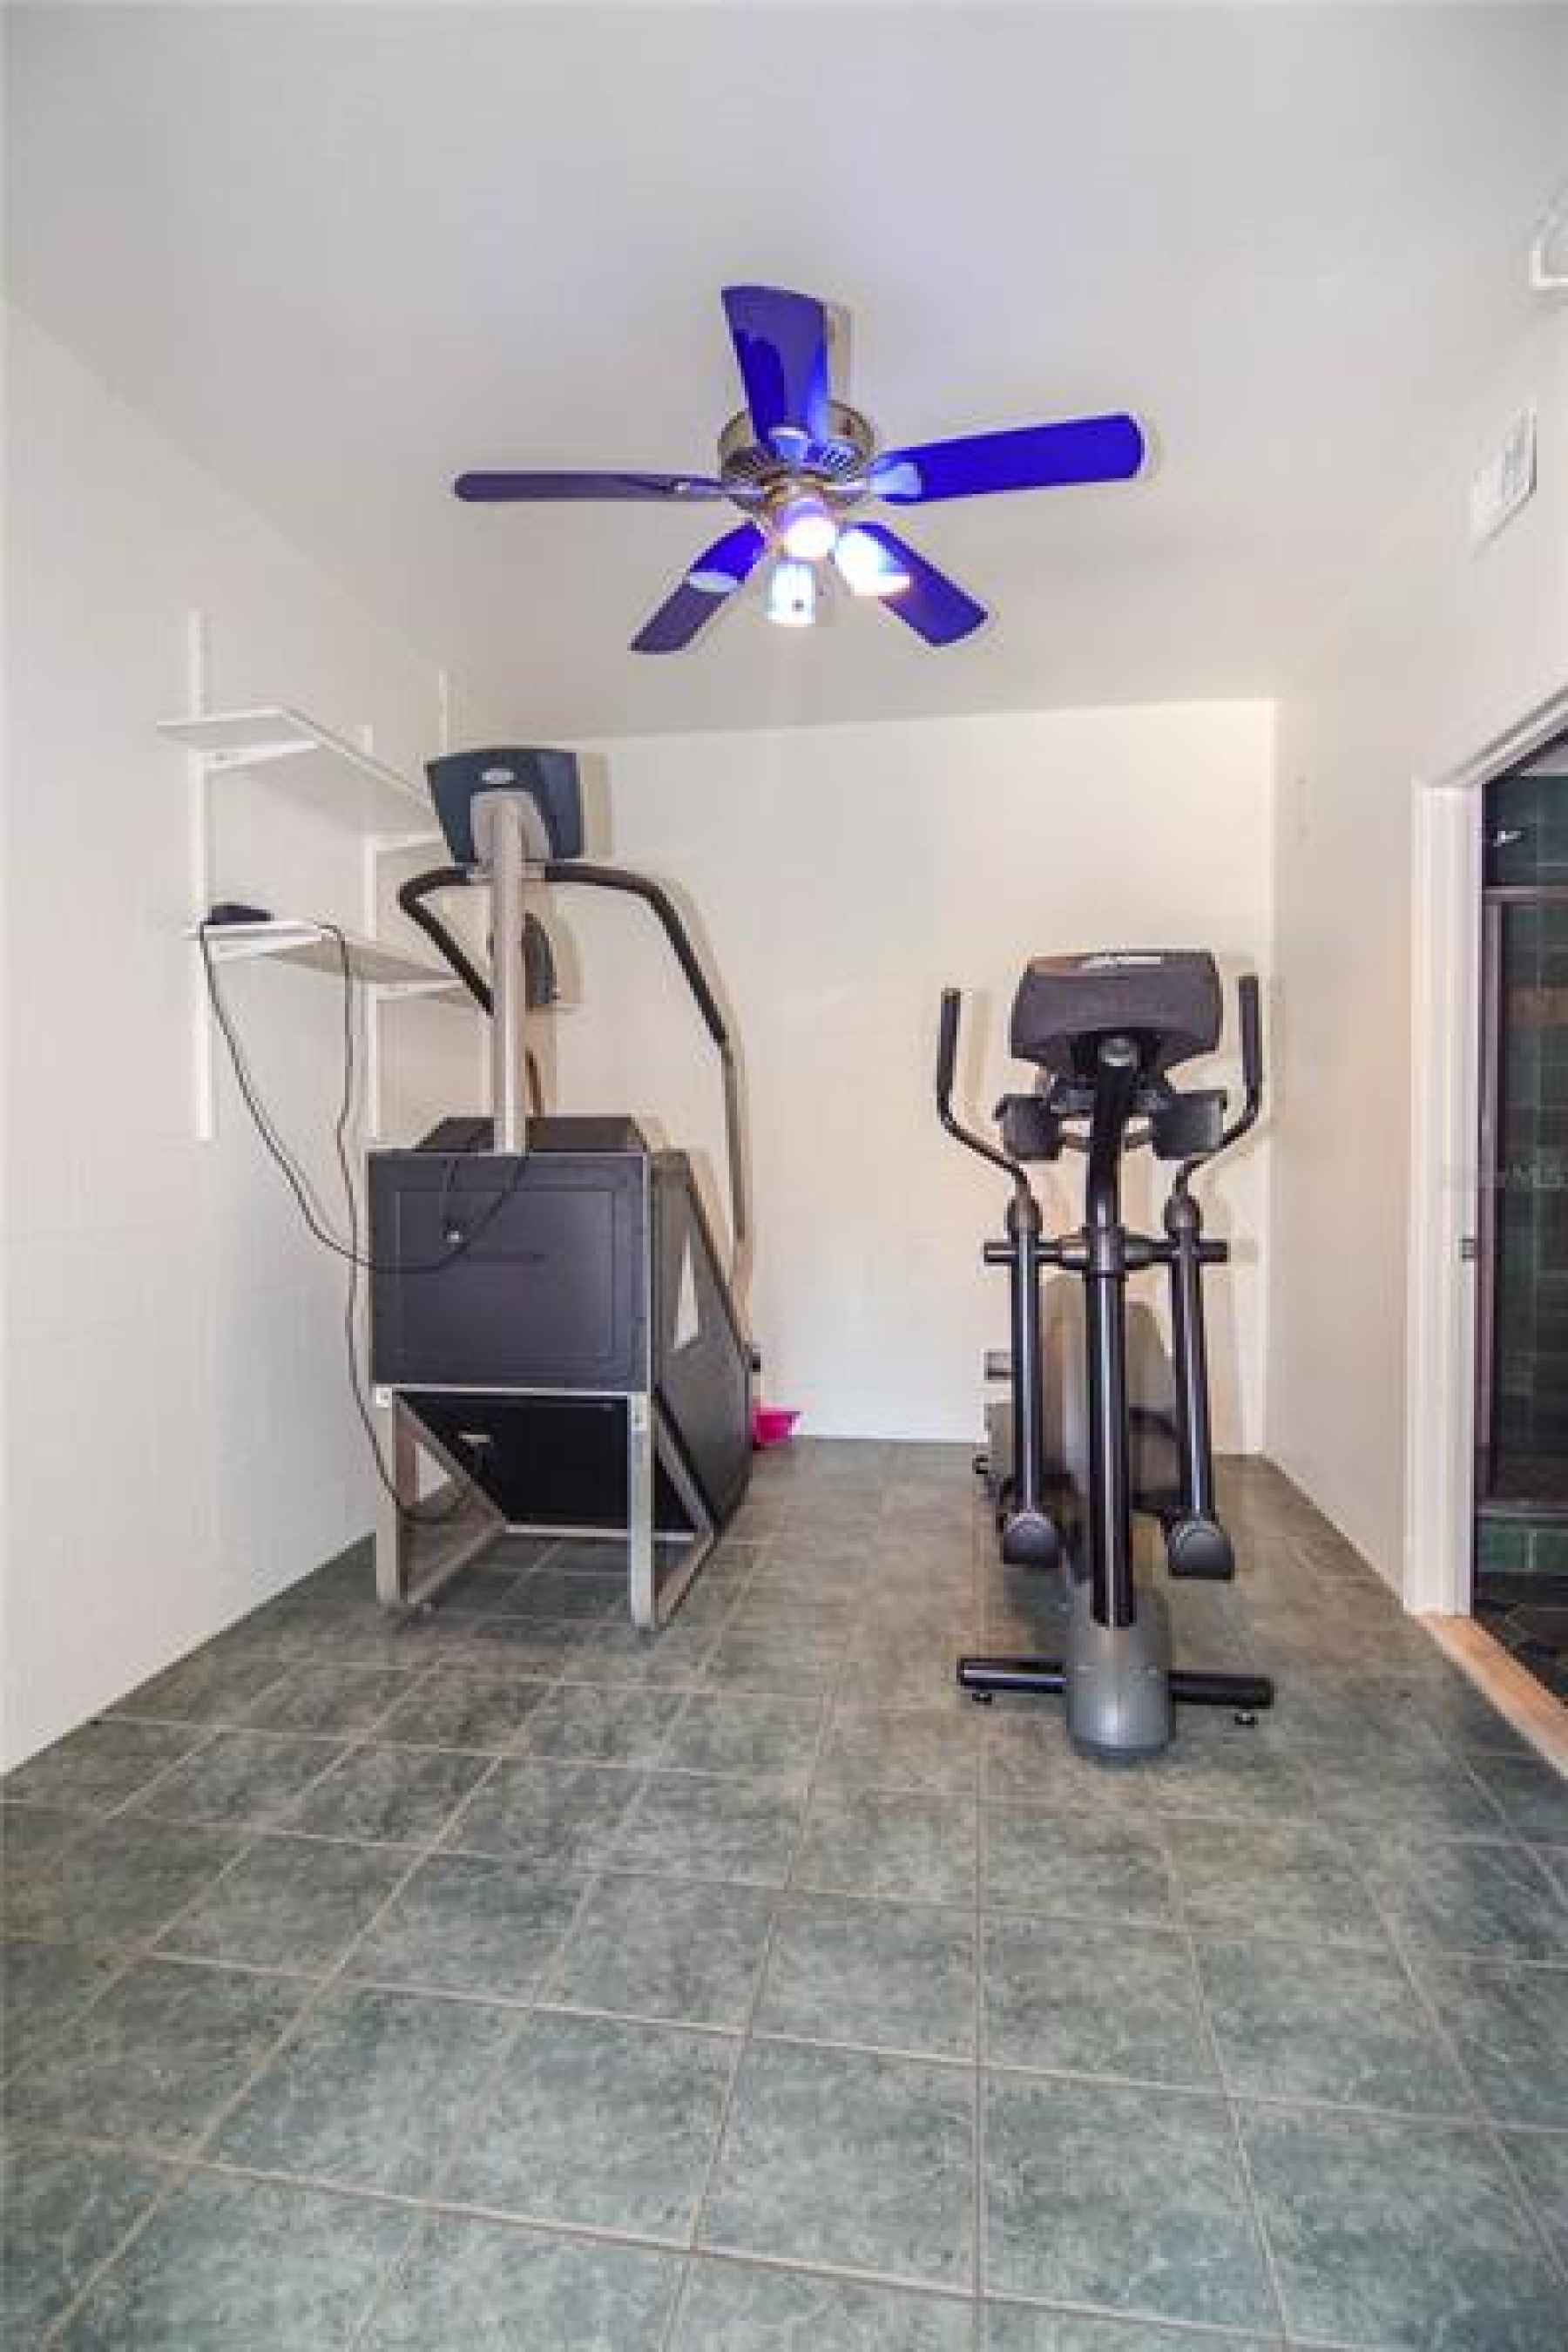 Climate Controlled Workout Room